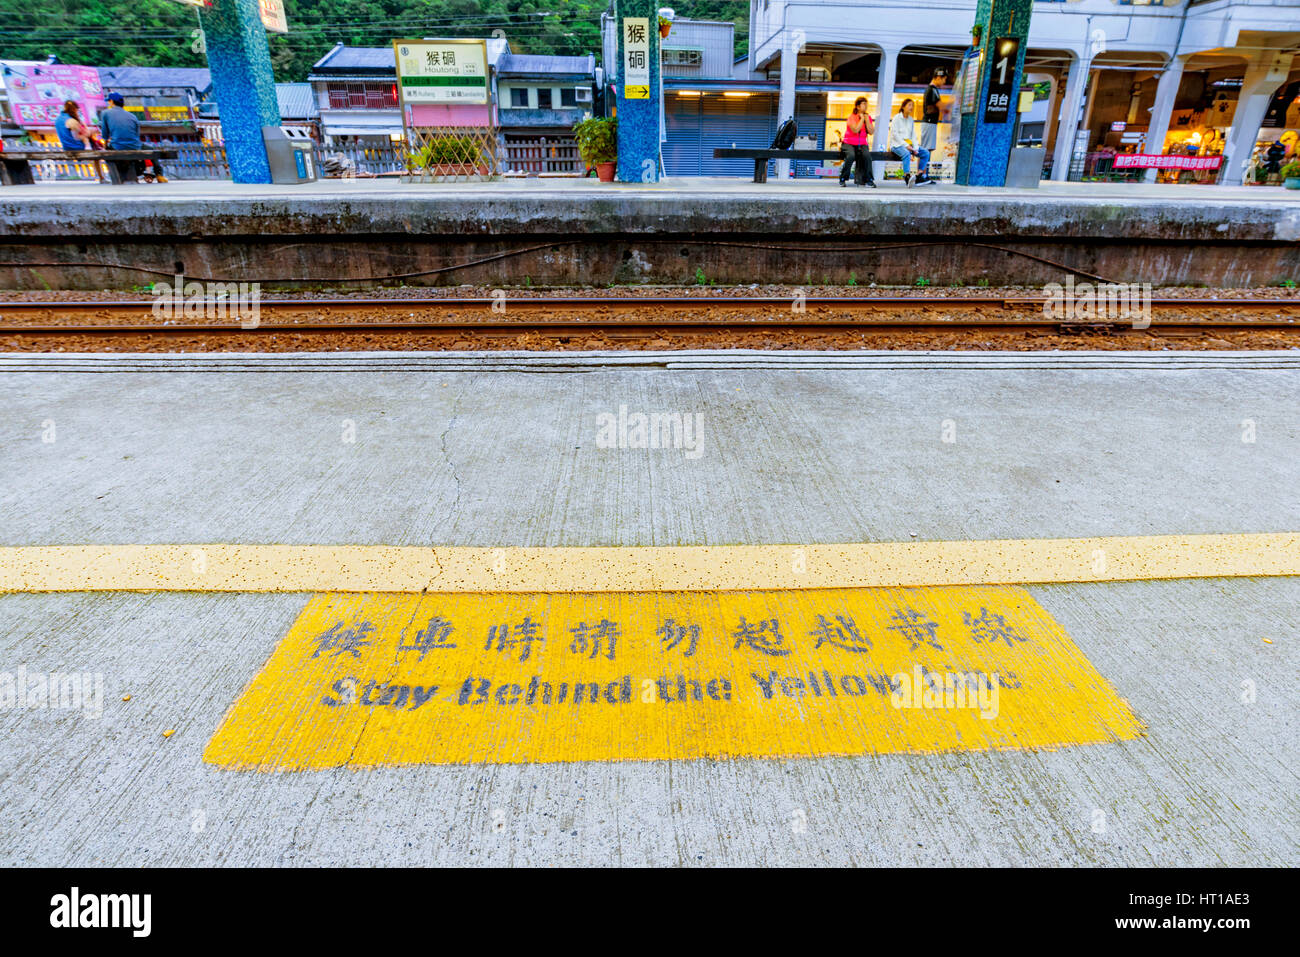 TAIPEI, TAIWAN - NOVEMBER 20: This is the train station of Houtong cat village waiting platform where passengers wait for trains on November 20, 2016  Stock Photo